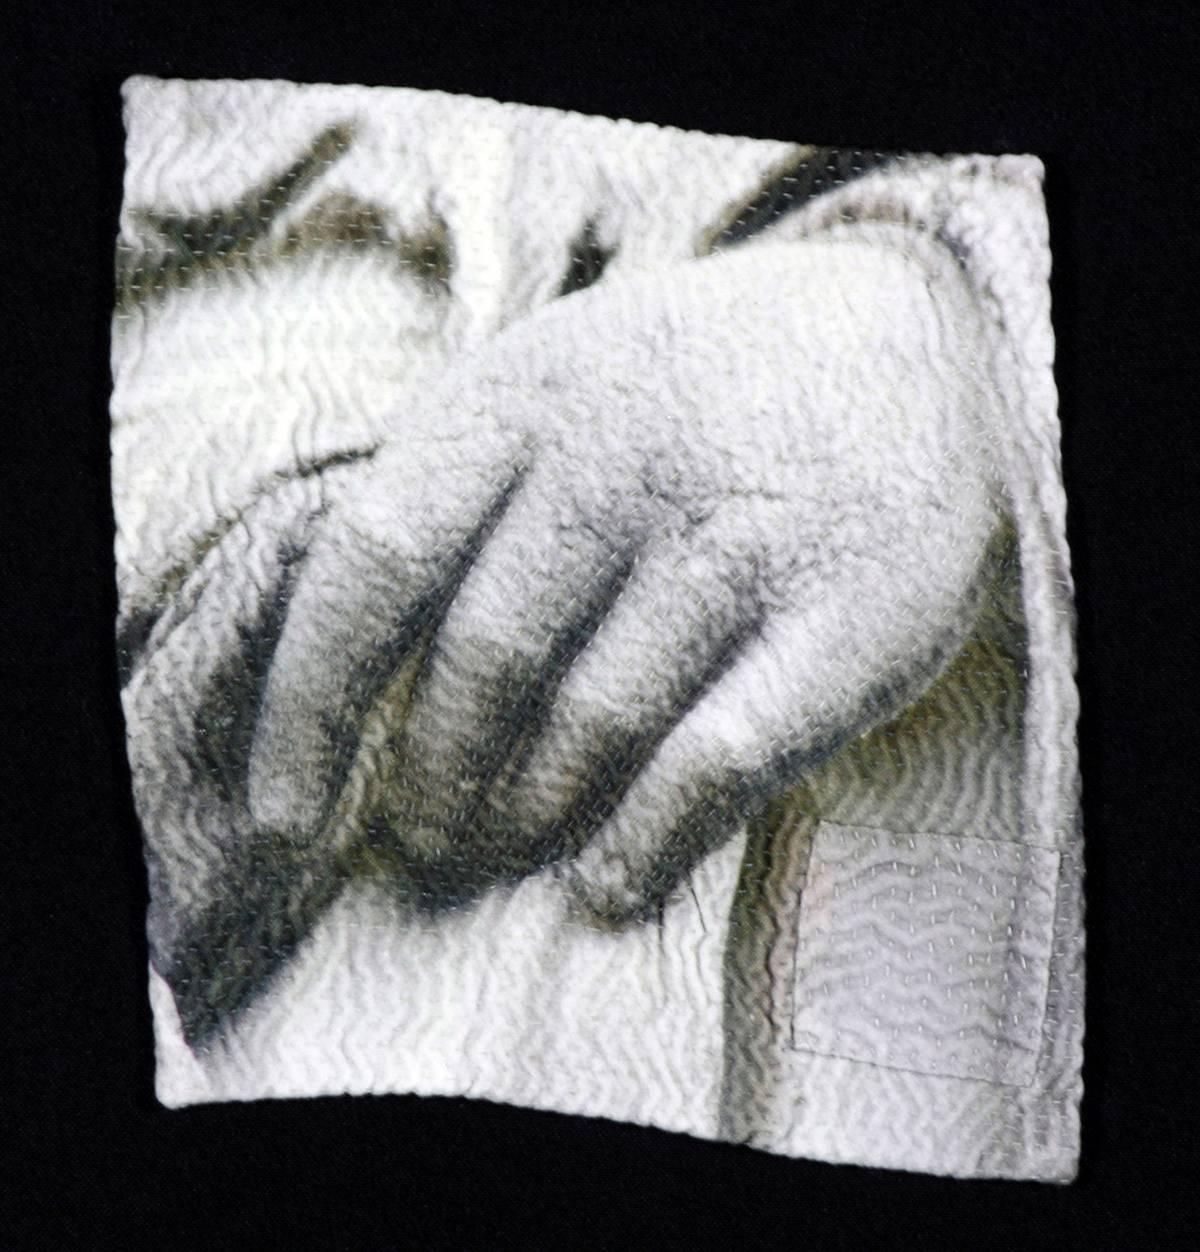 Luanne Rimel Black and White Photograph - "Touch", Digitally Printed Photography on Hand Stitched Fabric, Framed